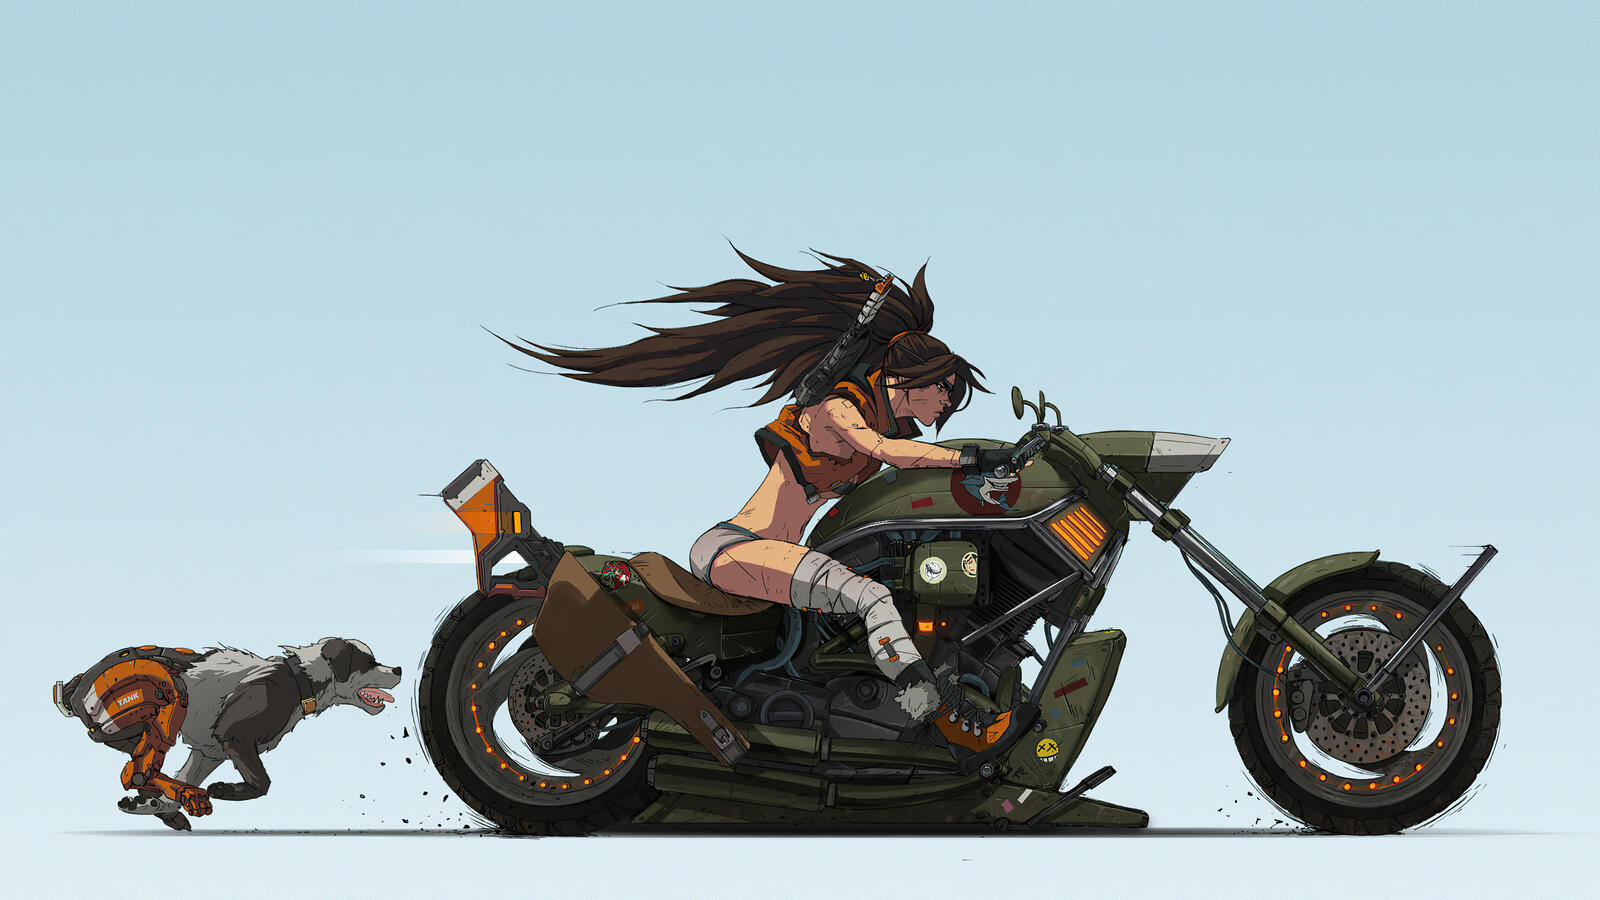 Wallpapers motorcycle artwork miscellaneous on the desktop